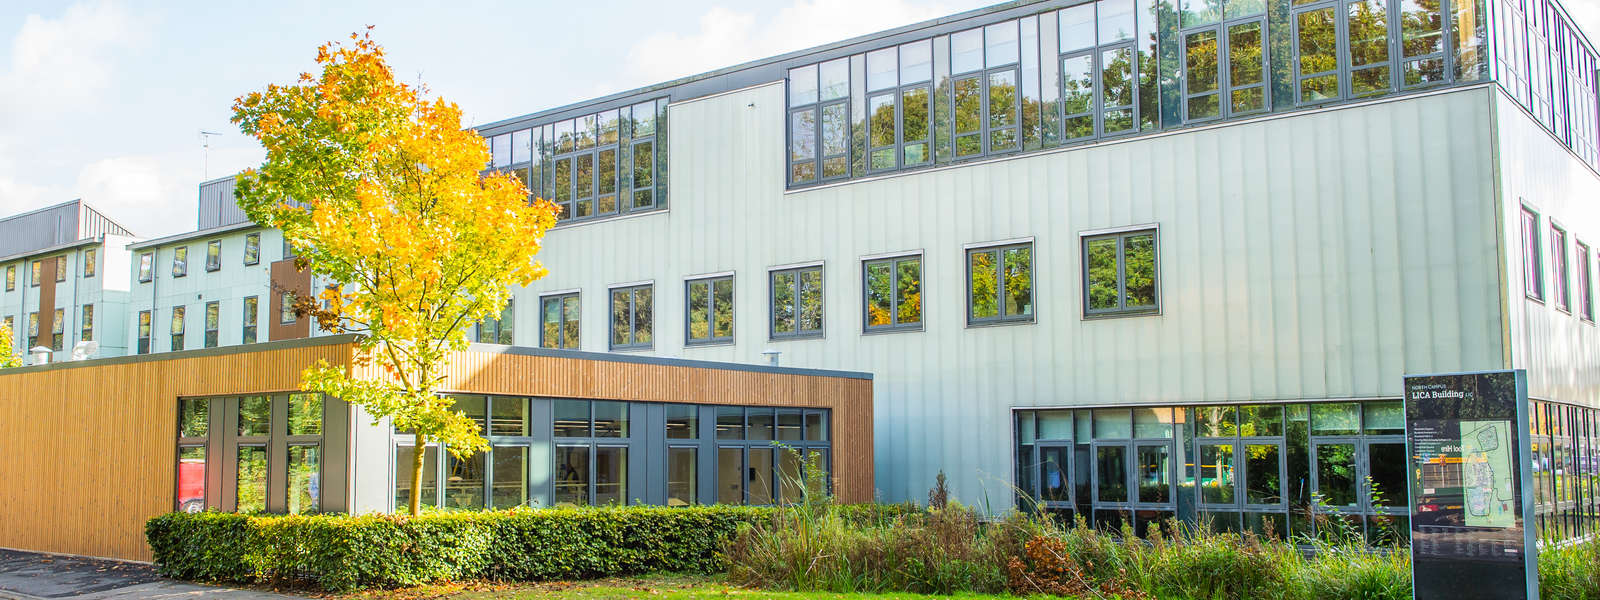 Architecture building and Lica building in autumn. 